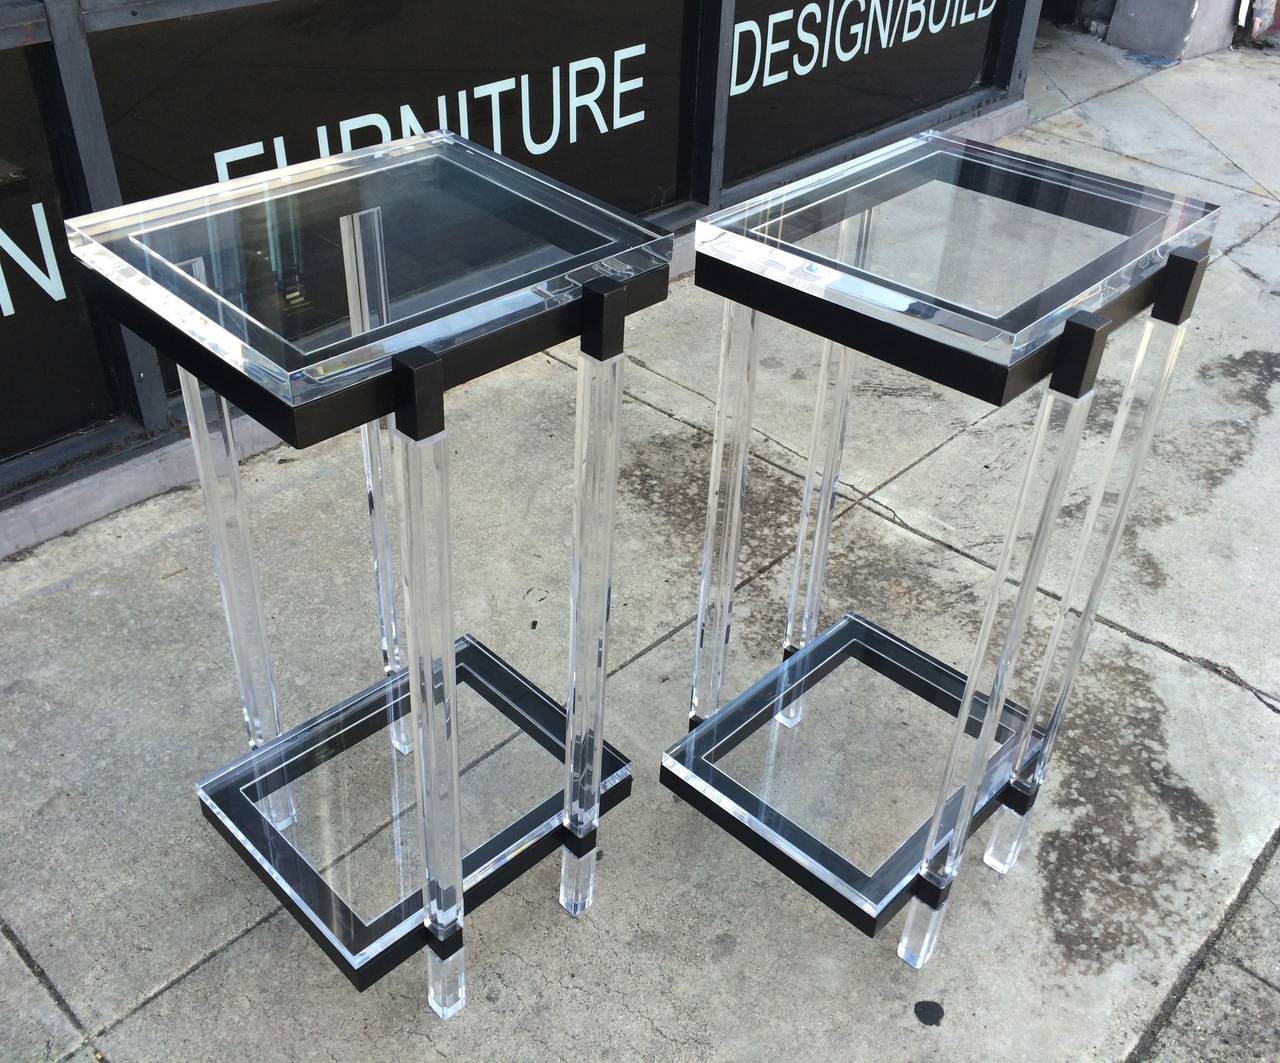 Beautiful set of tall side tables or pedestals in Lucite and black enamel metal by Charles Hollis Jones.

The tables are part of the 